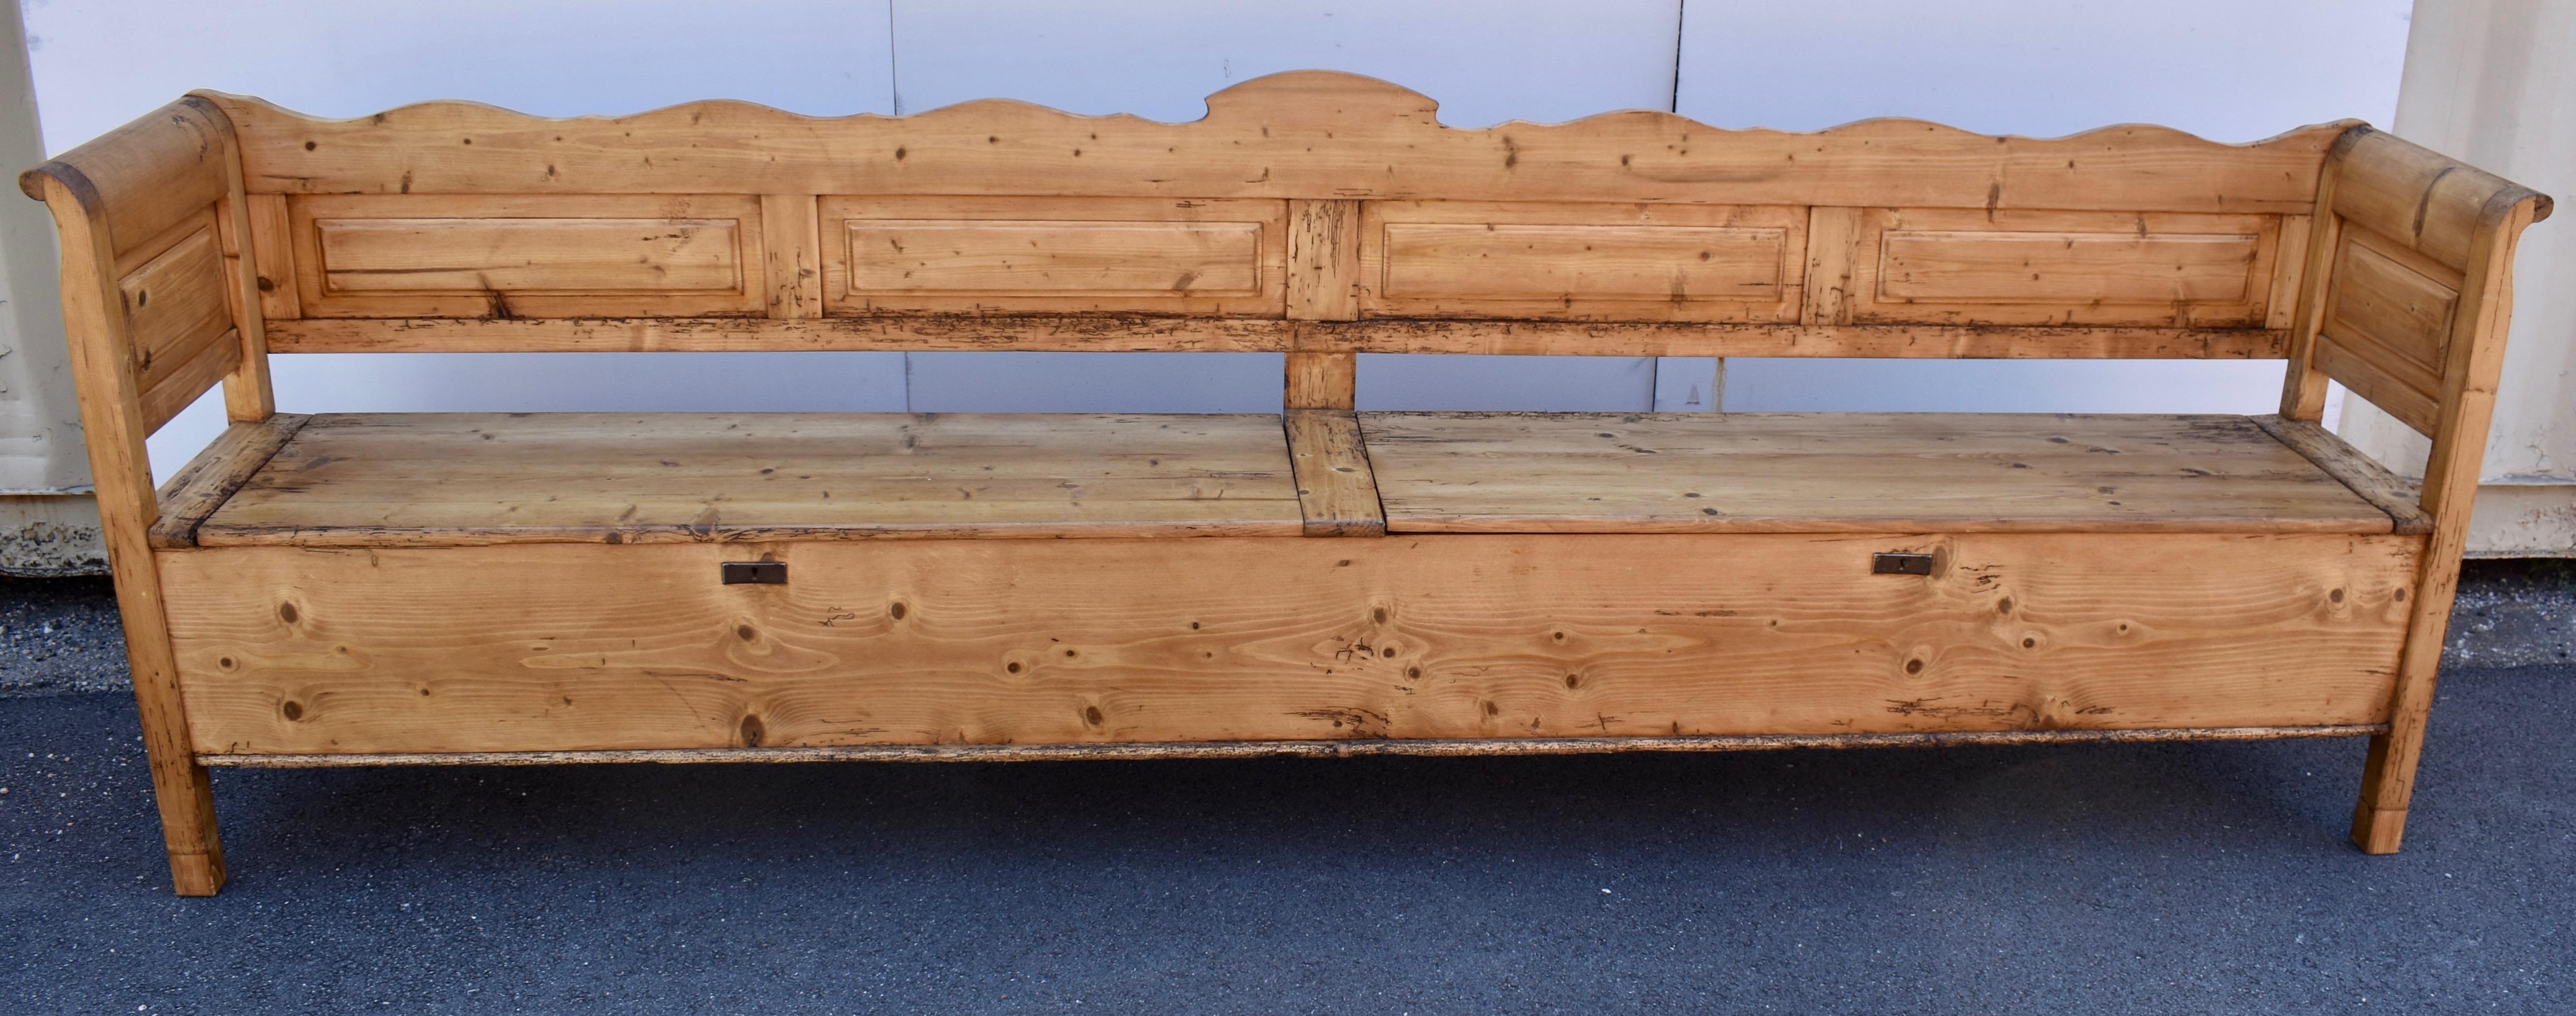 Polished Pine Double Storage Bench For Sale